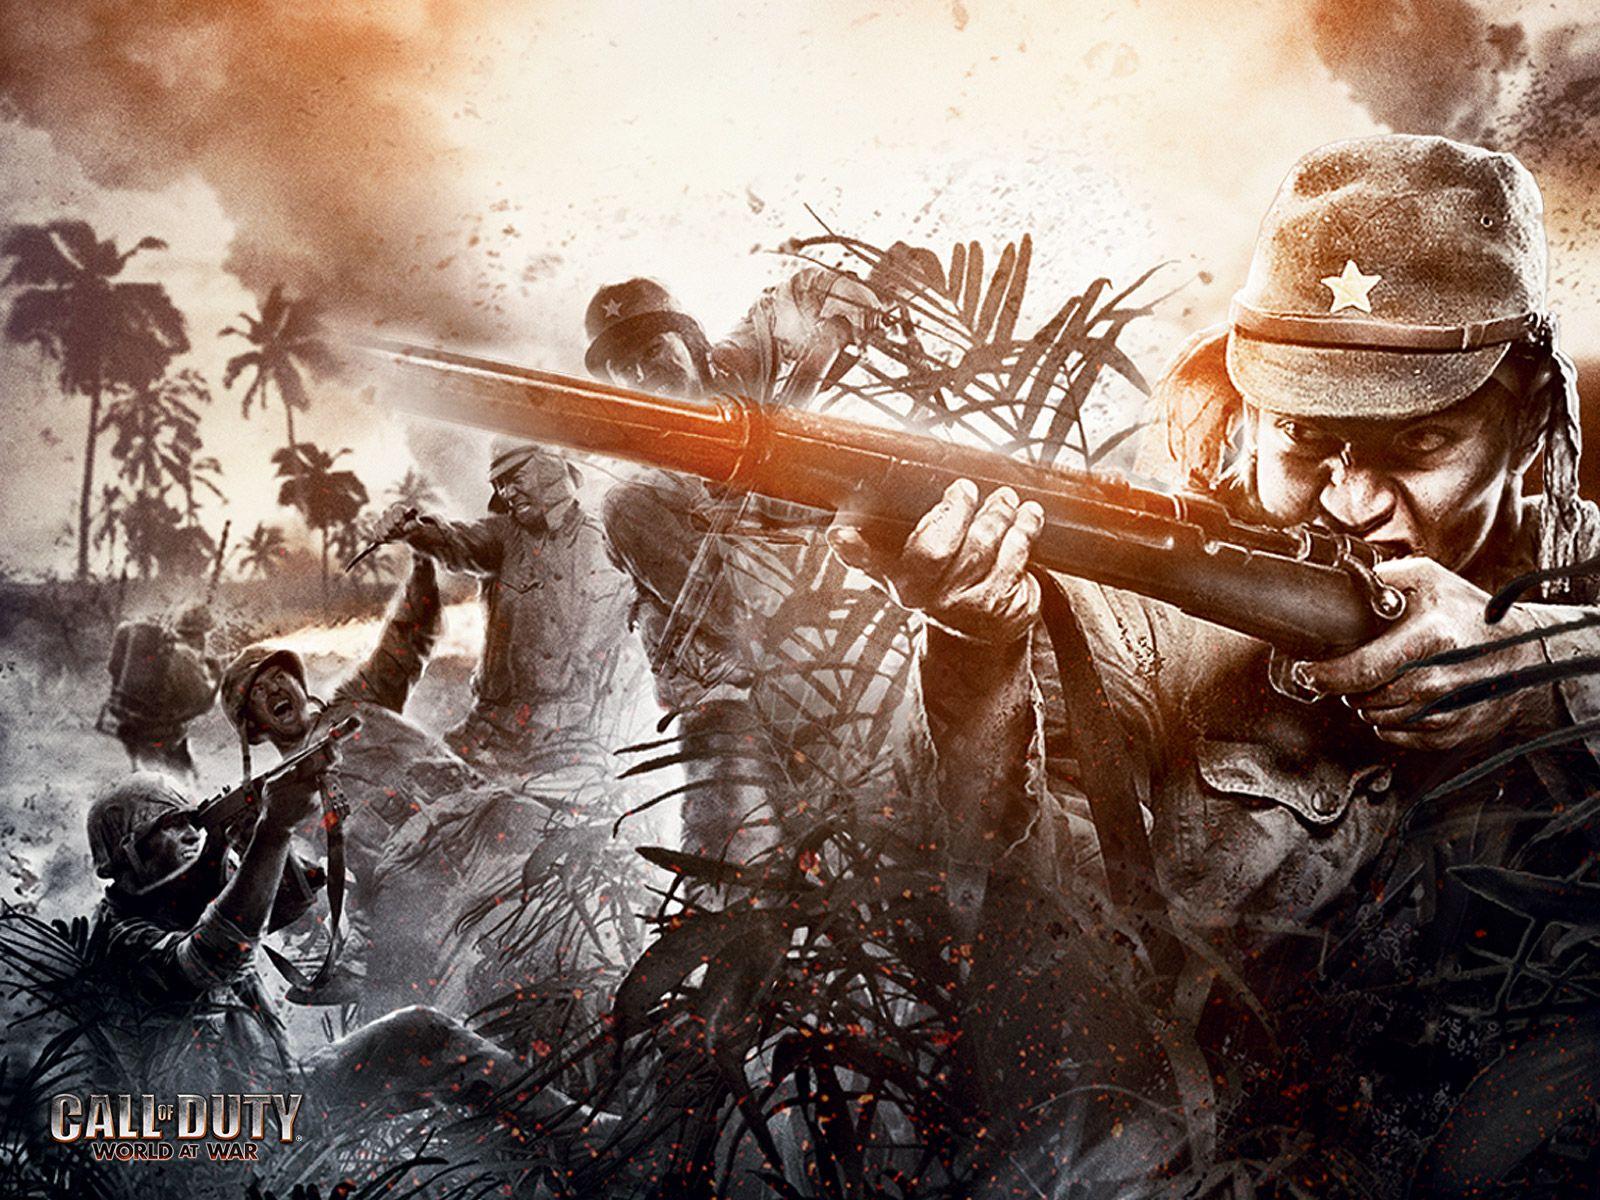 Call of duty 5 wallpaper Group (73)